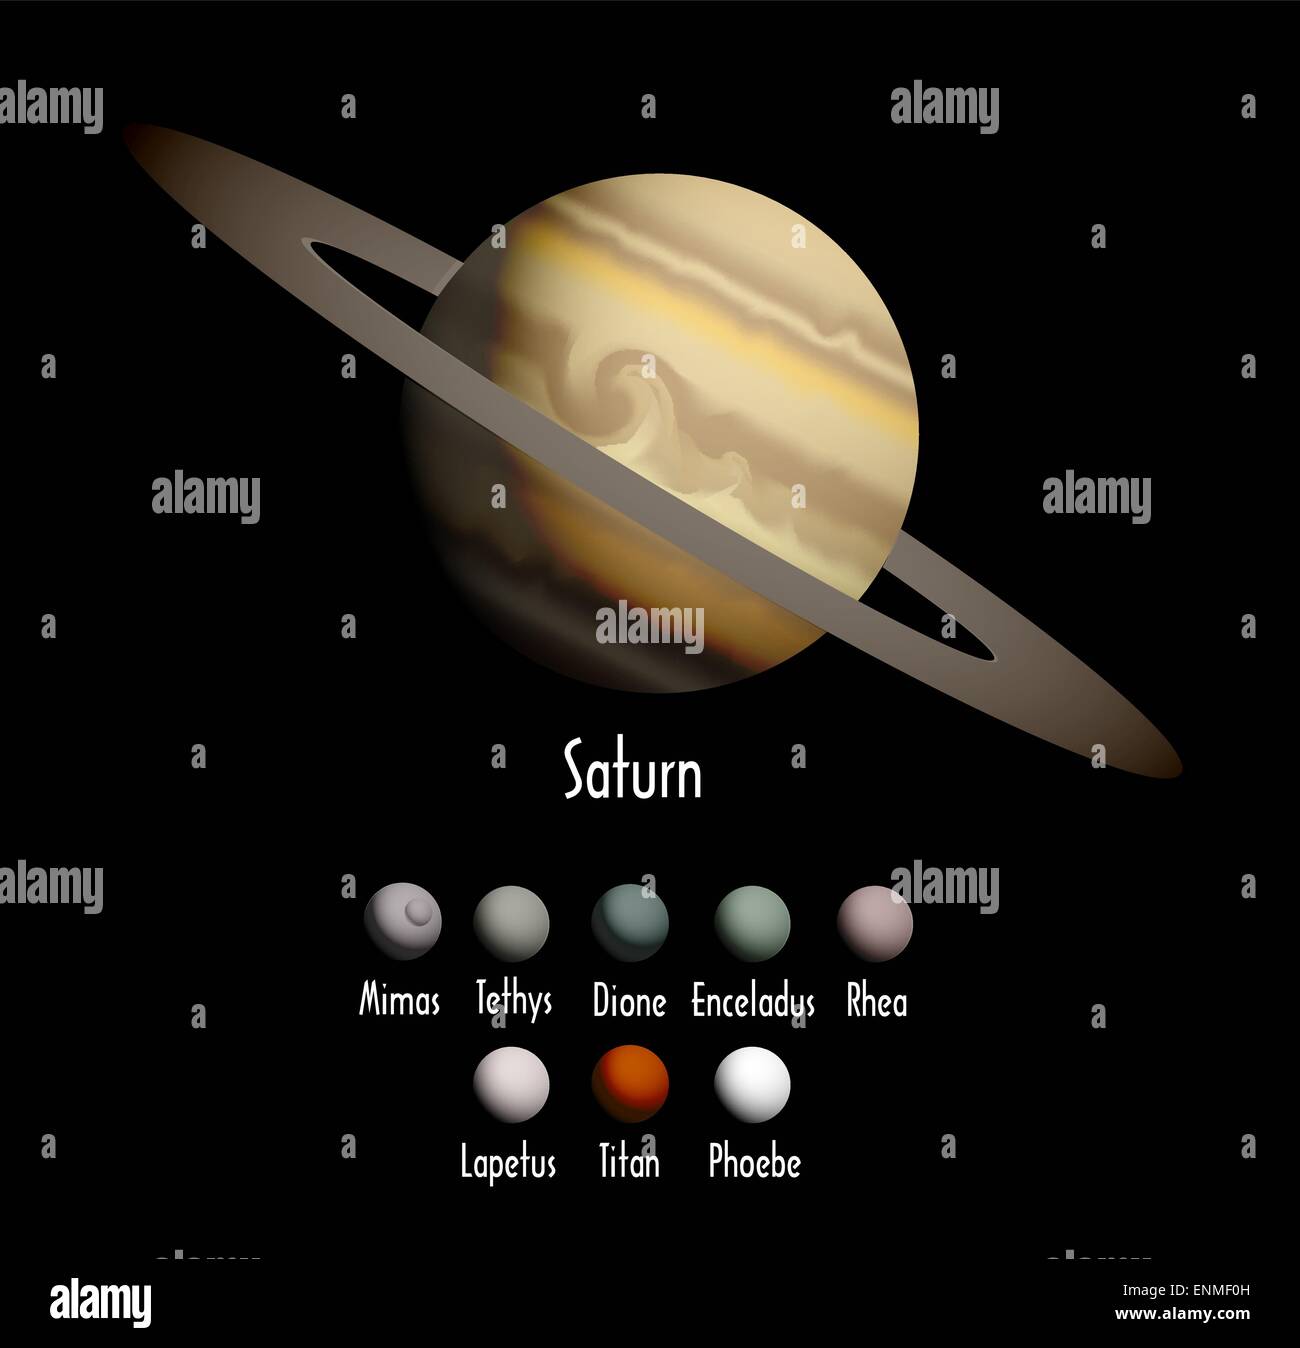 Saturn planet moons Stock Vector Images - Alamy